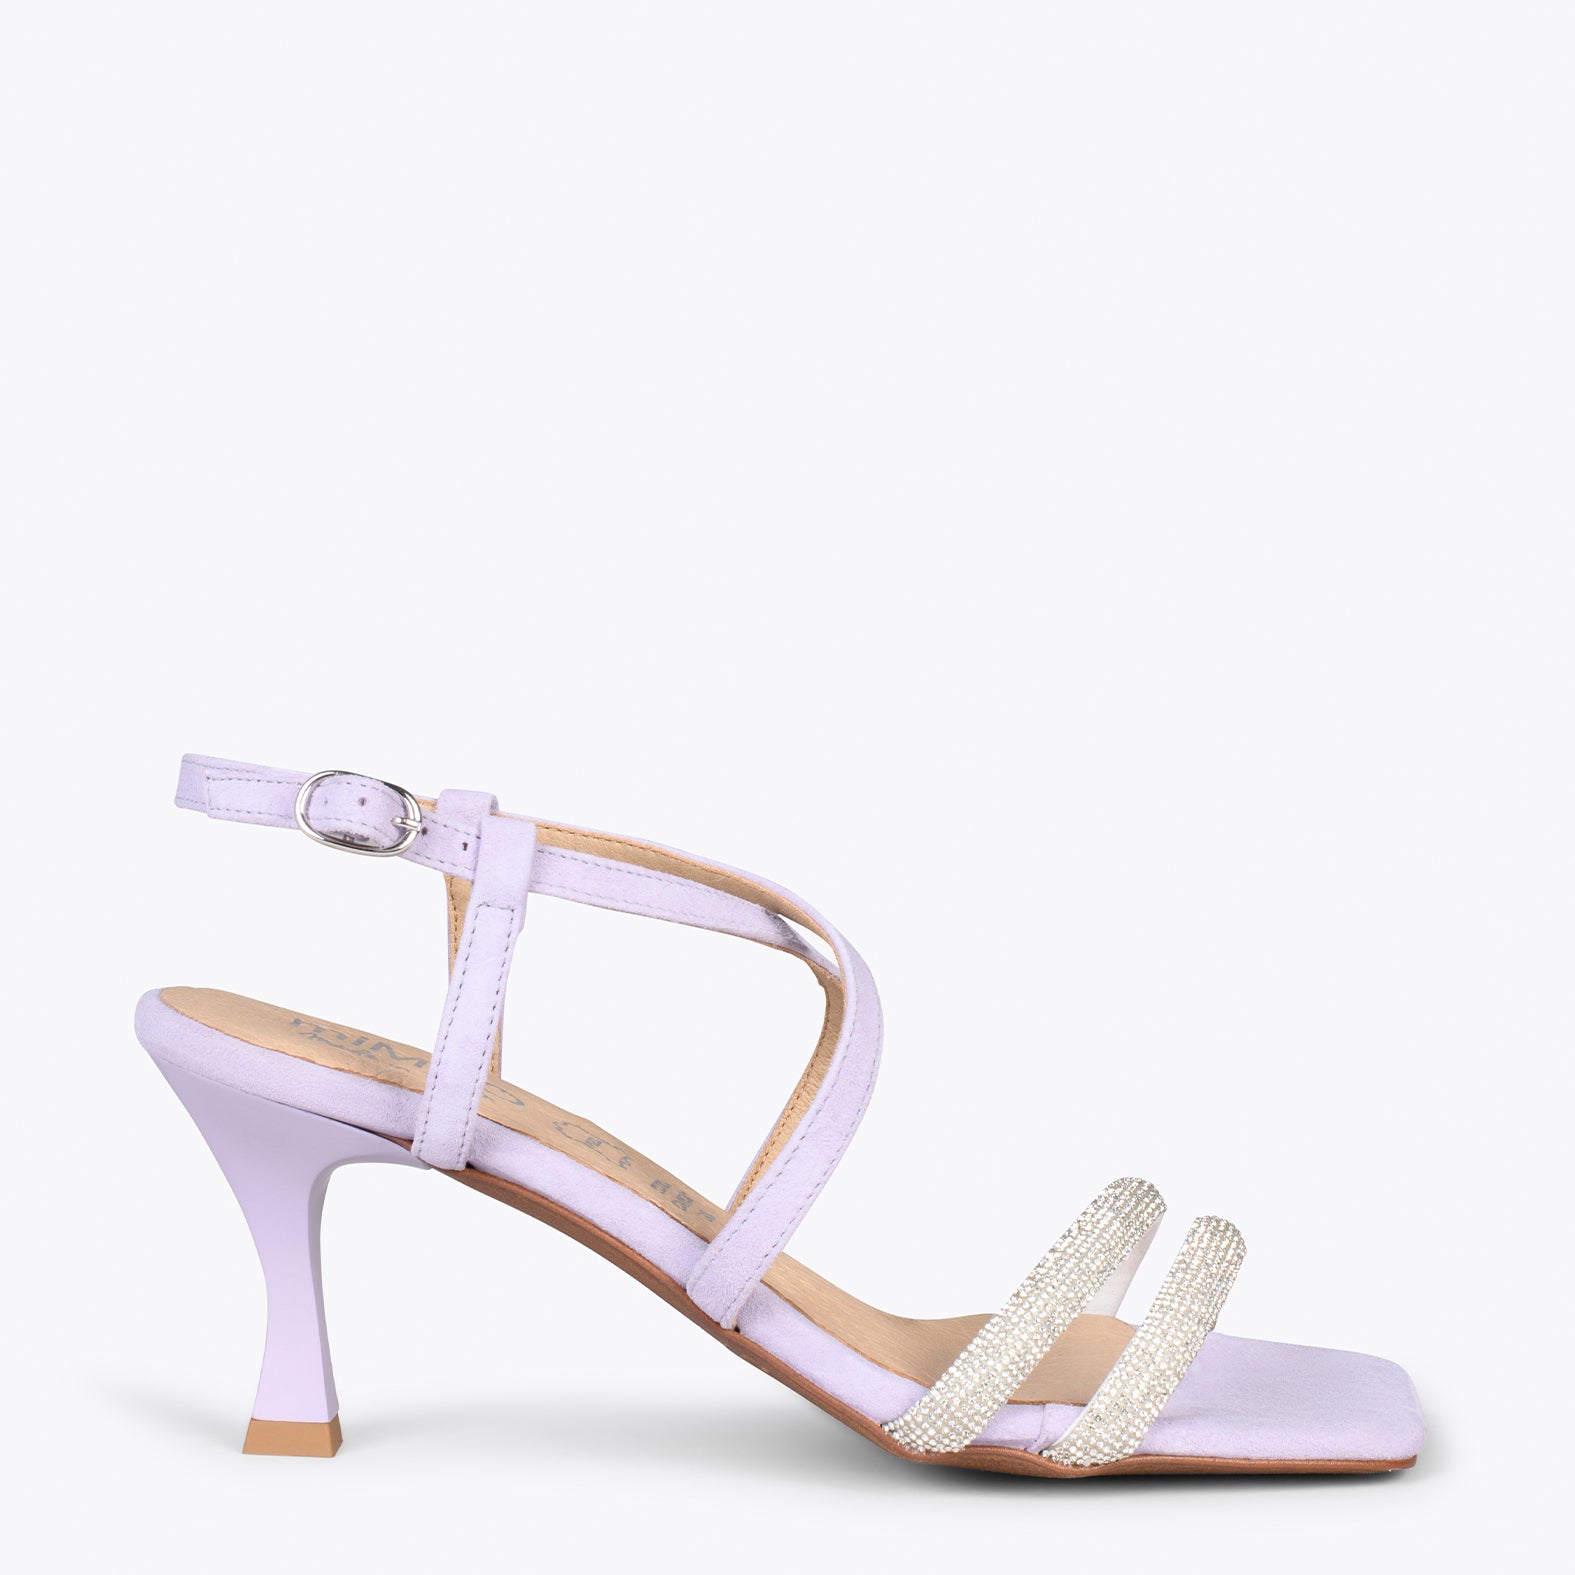 SHINY – LAVENDER high heel sandals with strass straps